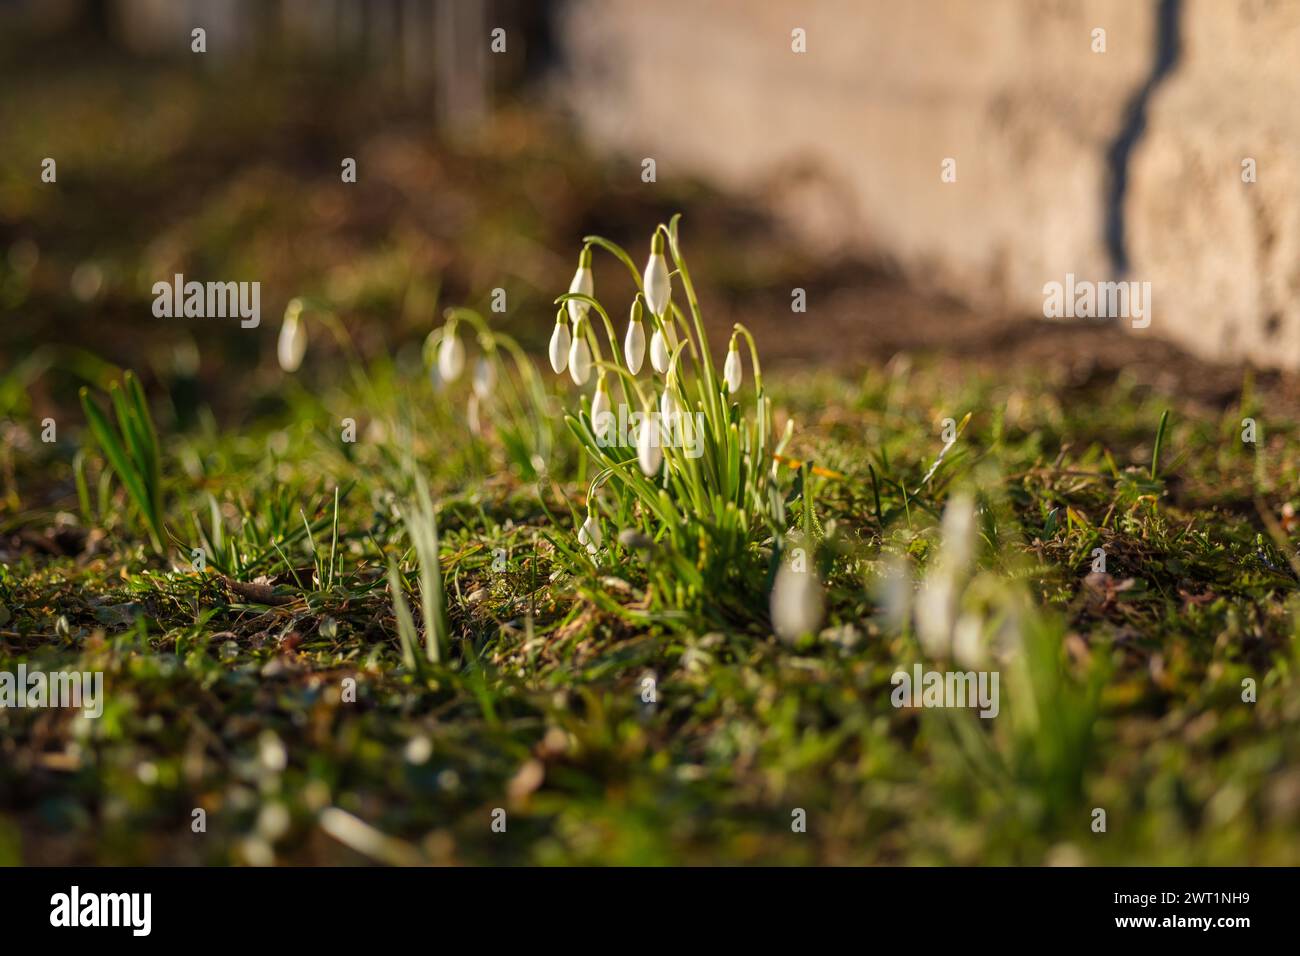 As snowdrops sway in Latvia's fields, they sing a sweet serenade of spring's arrival. Stock Photo